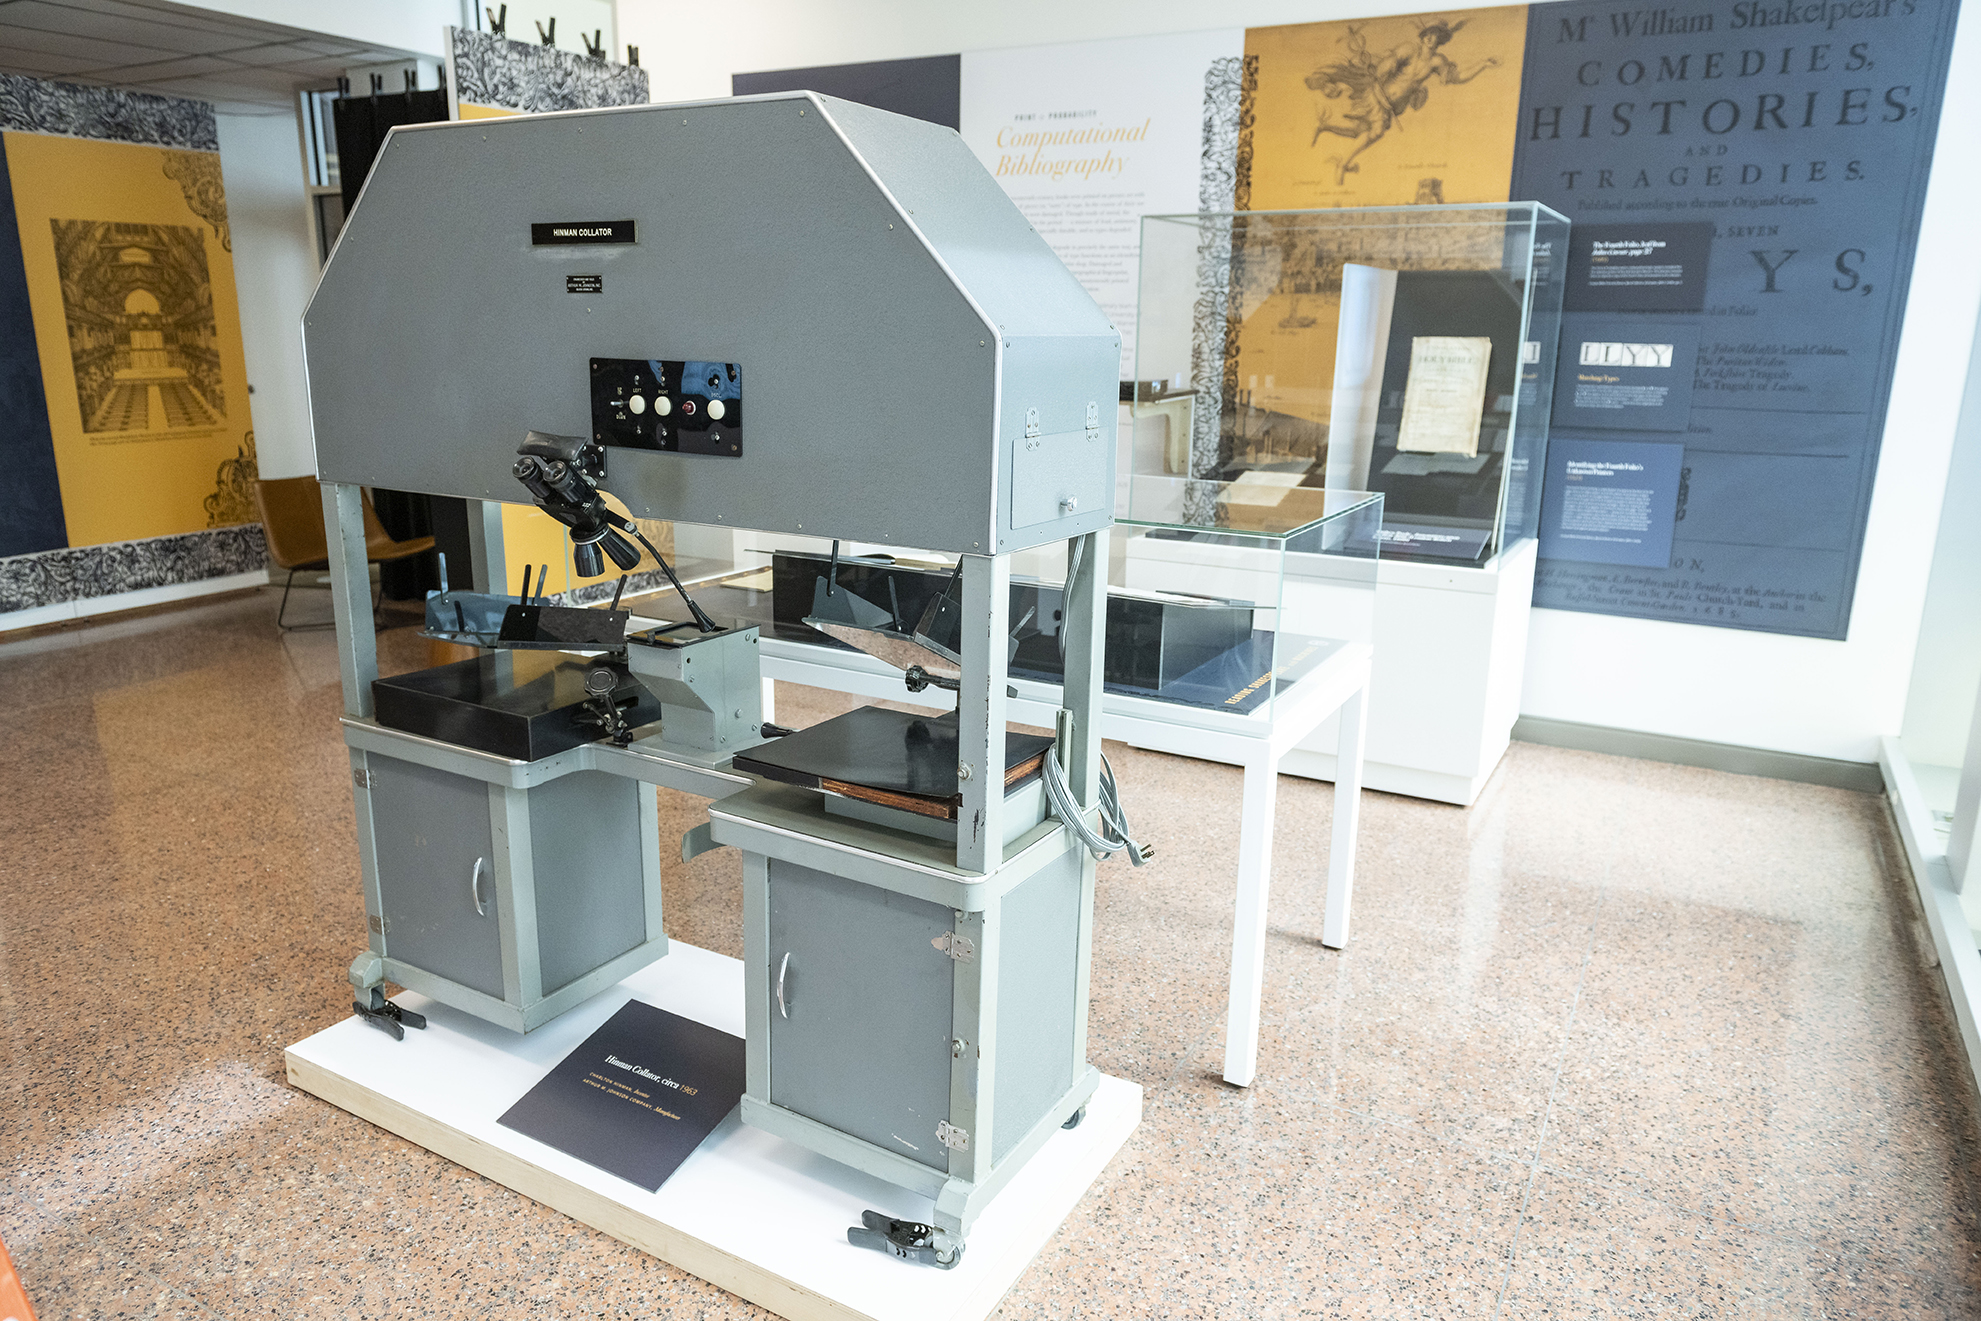 Installation view of "Inventing Shakespeare" with Hinman Collator.